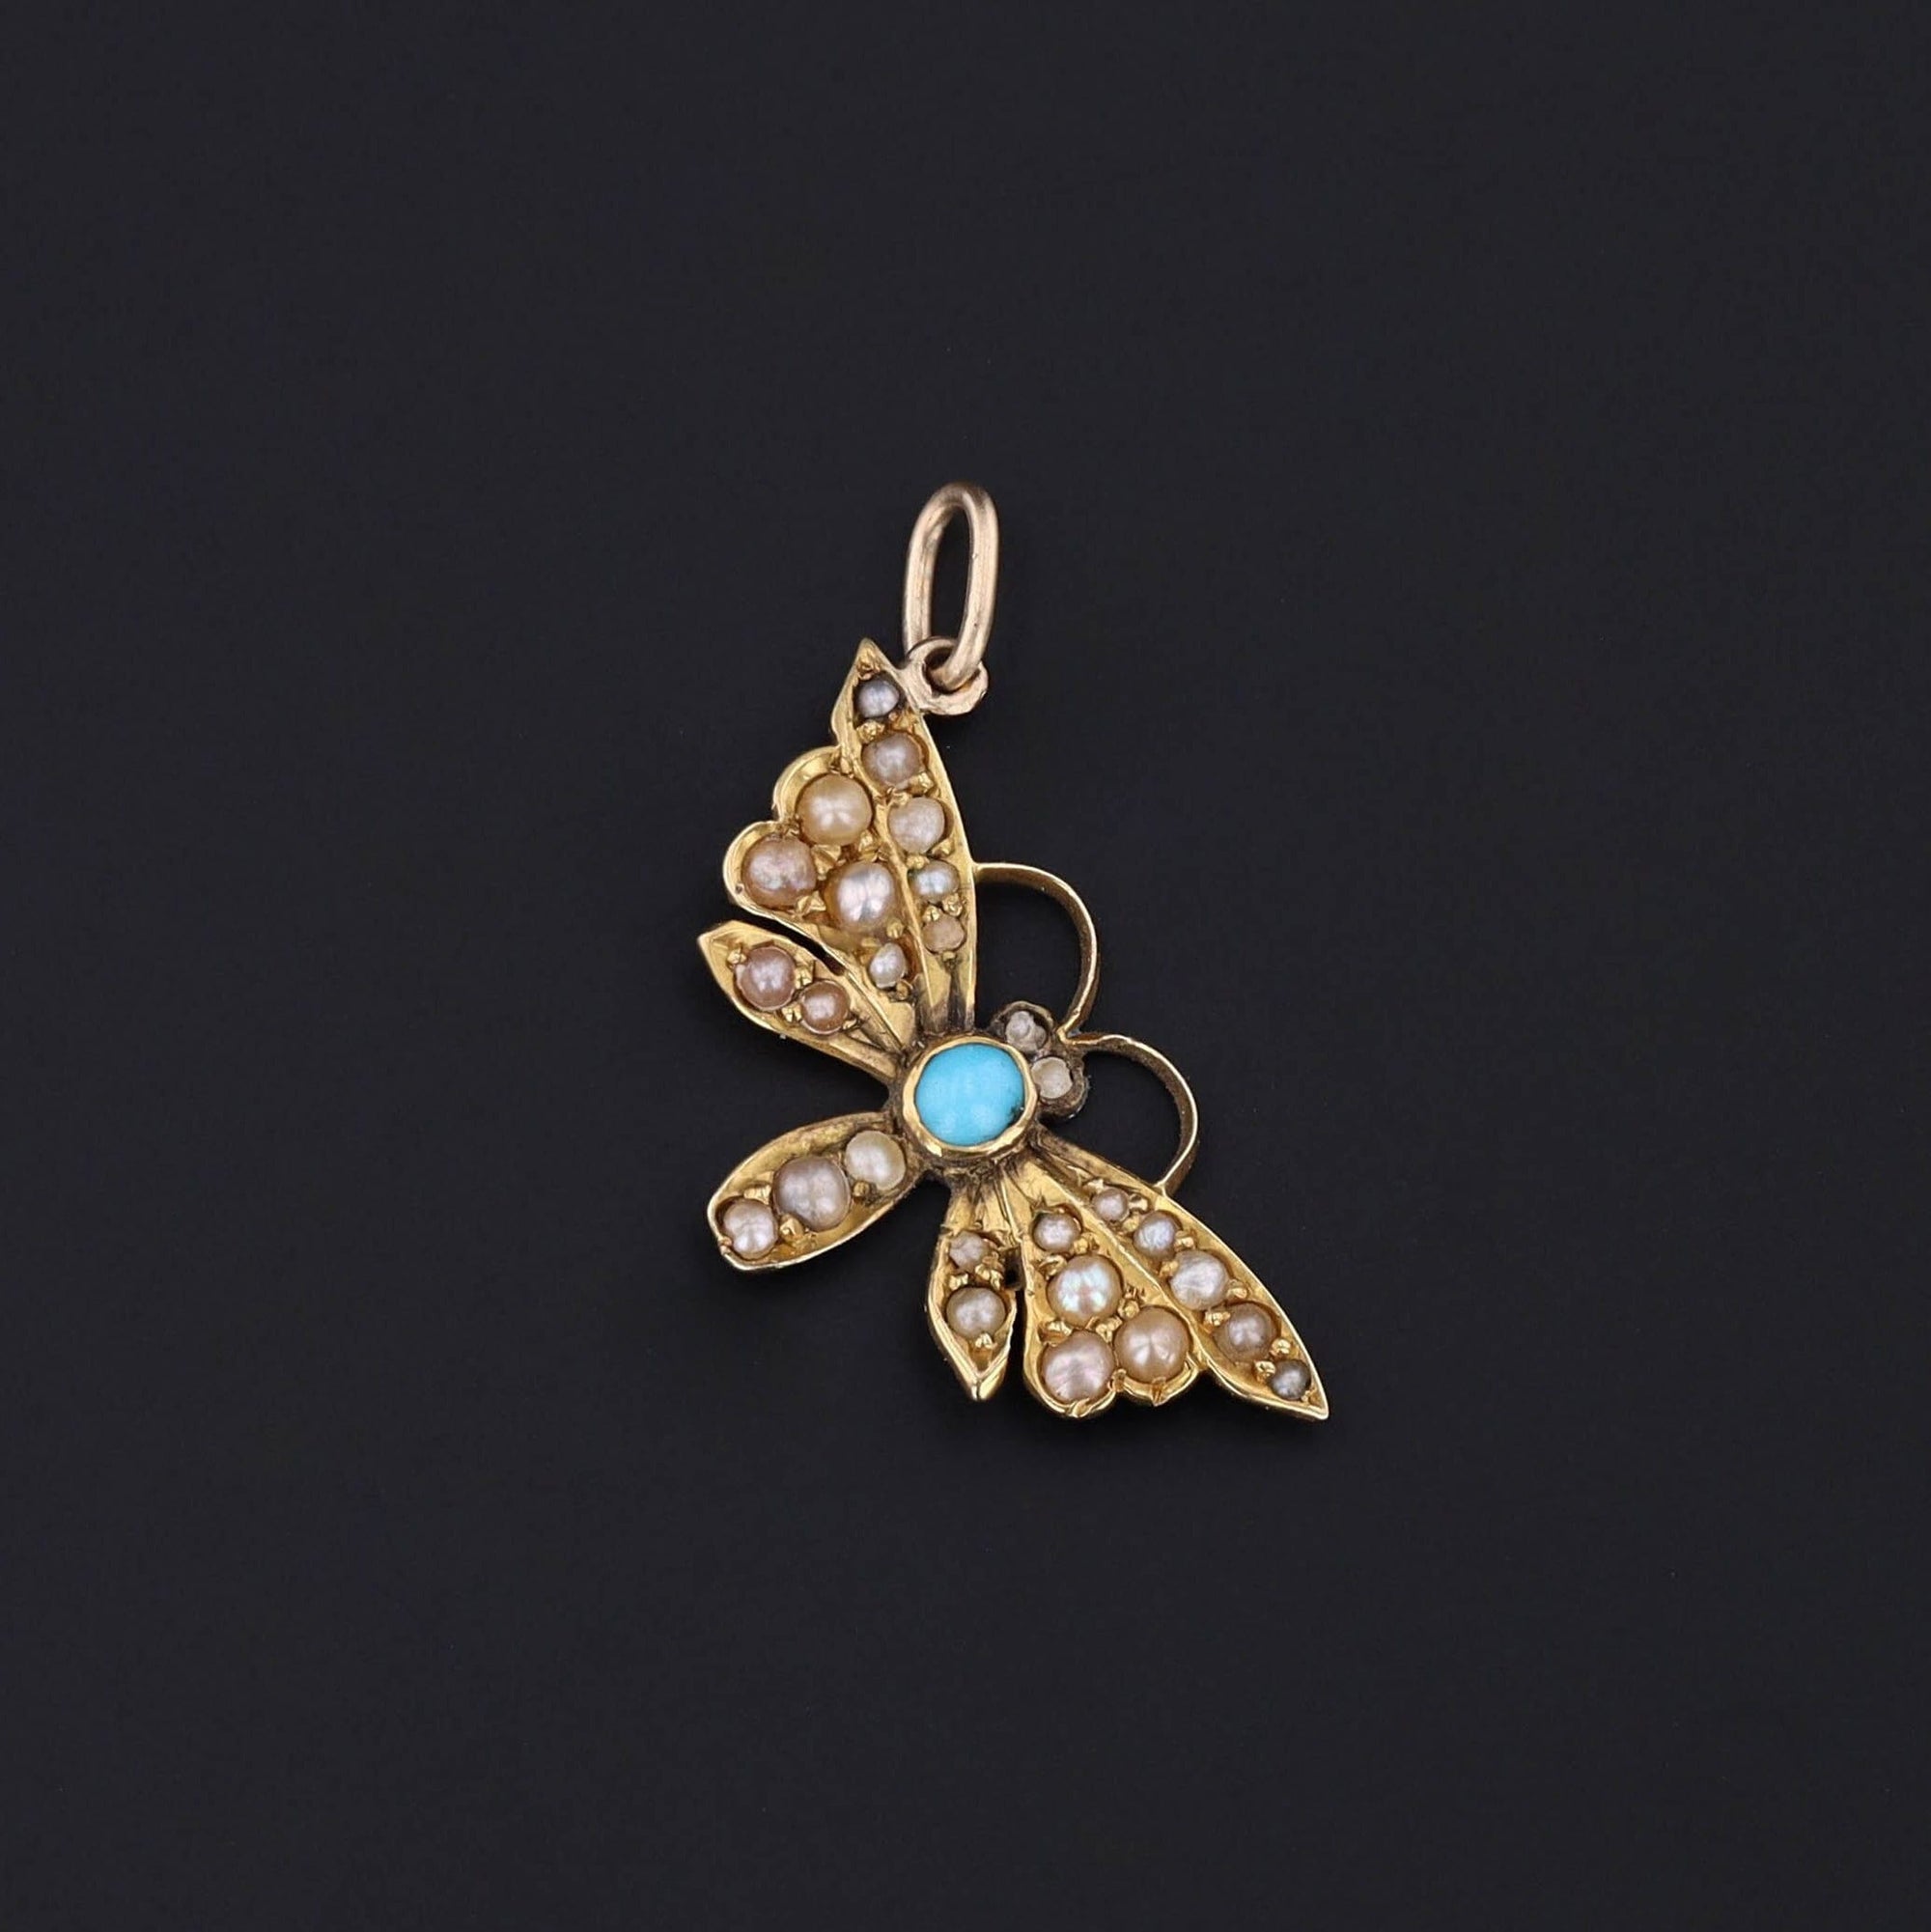 Butterfly Charm | Antique Butterfly Charm or Pendant 